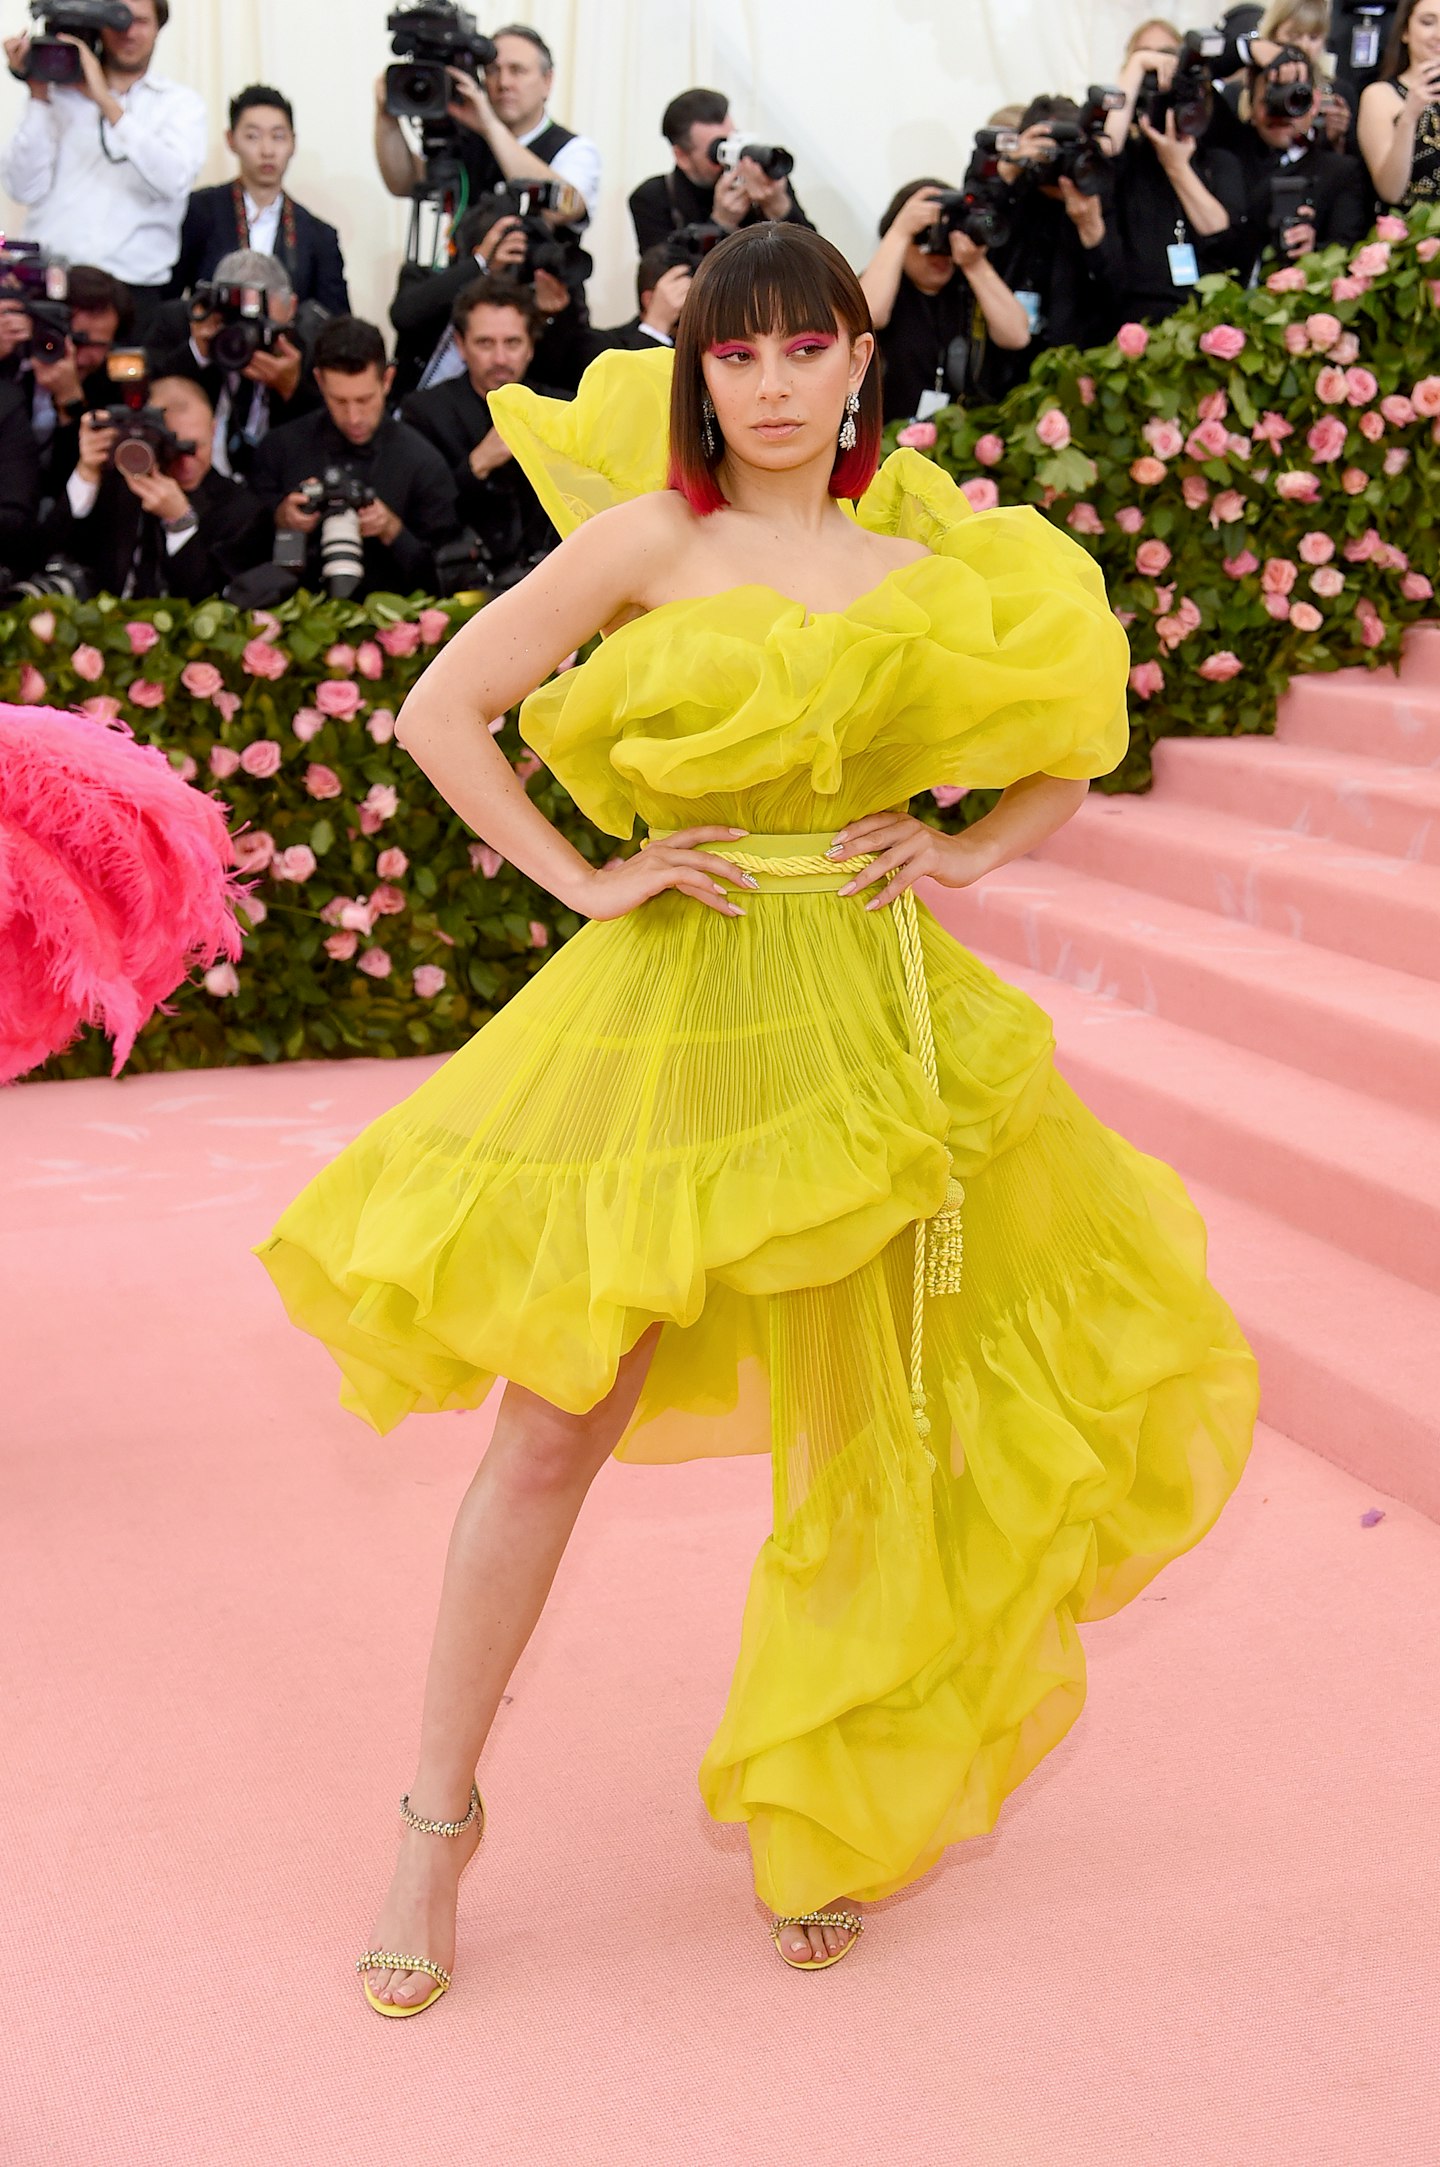 Charli XCX made her Met Gala debut in neon yellow